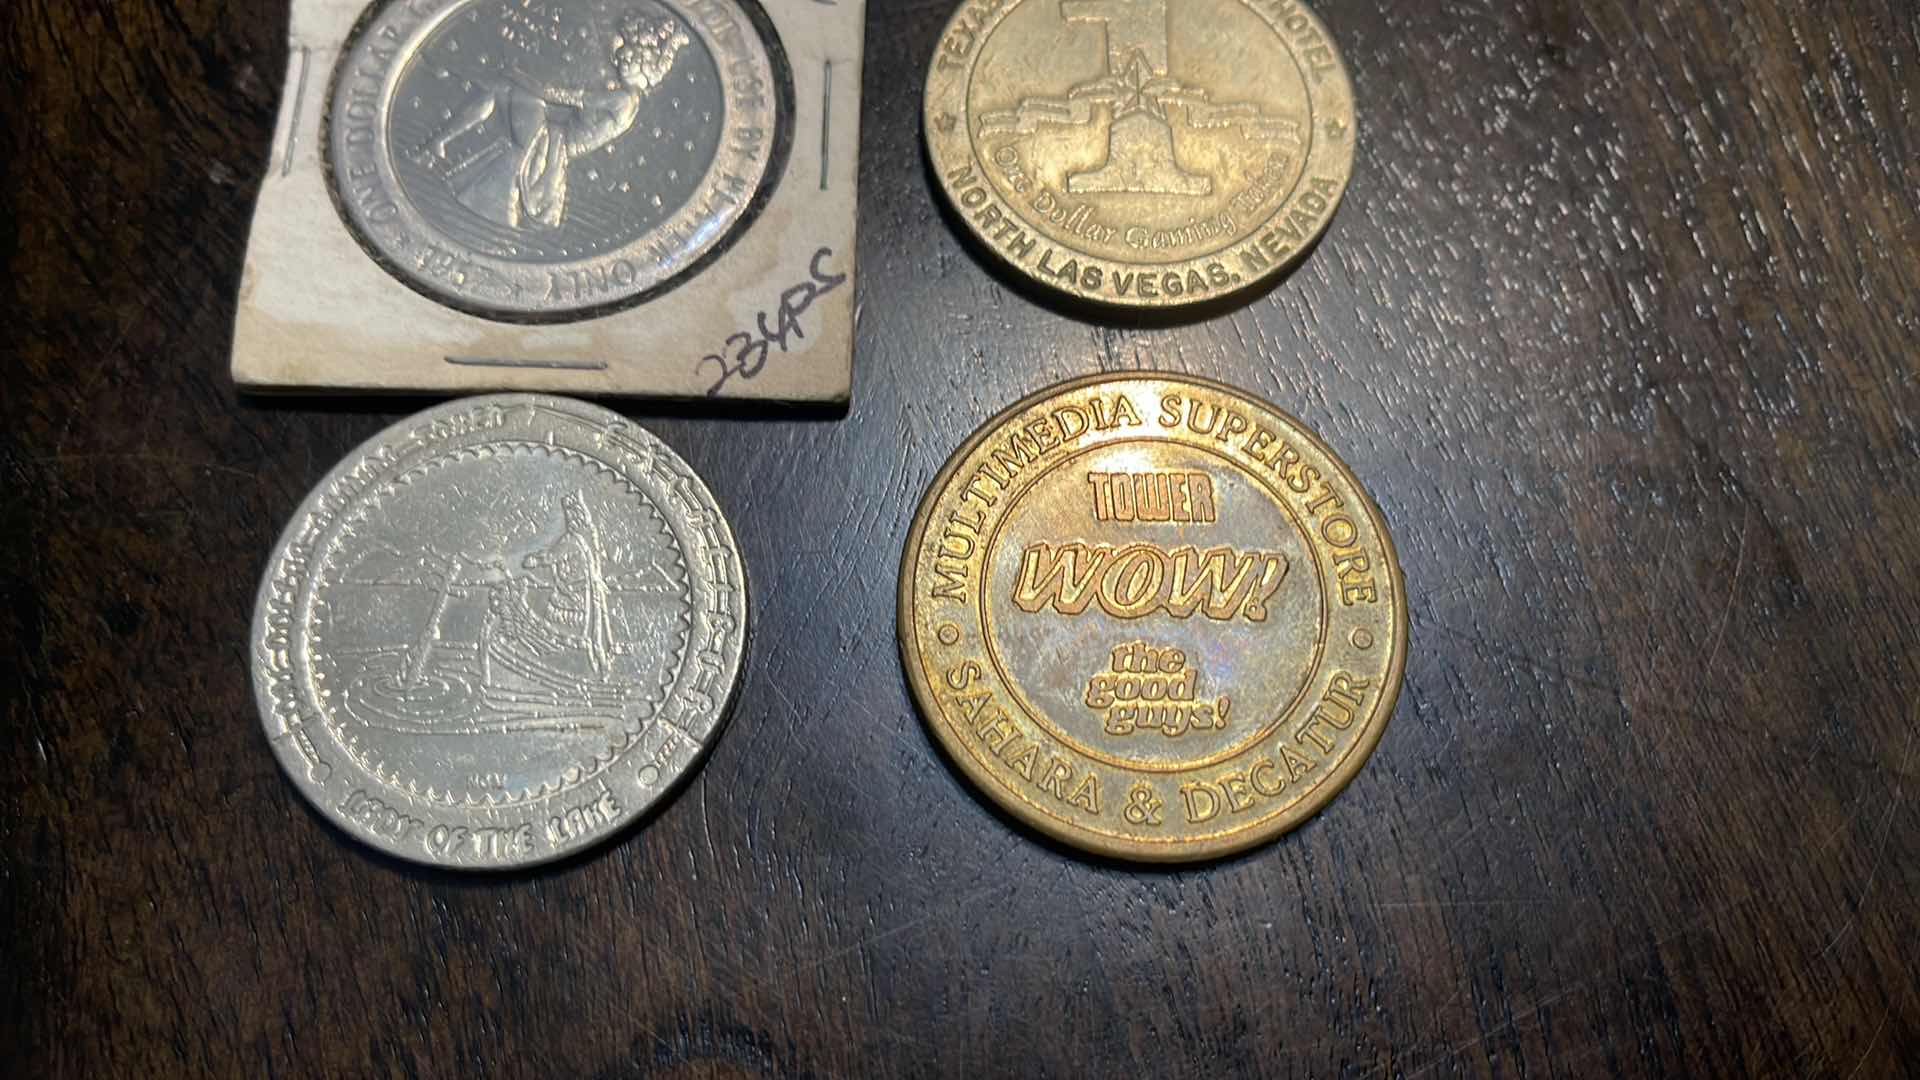 Photo 2 of 6 VINTAGE CASINO COINS